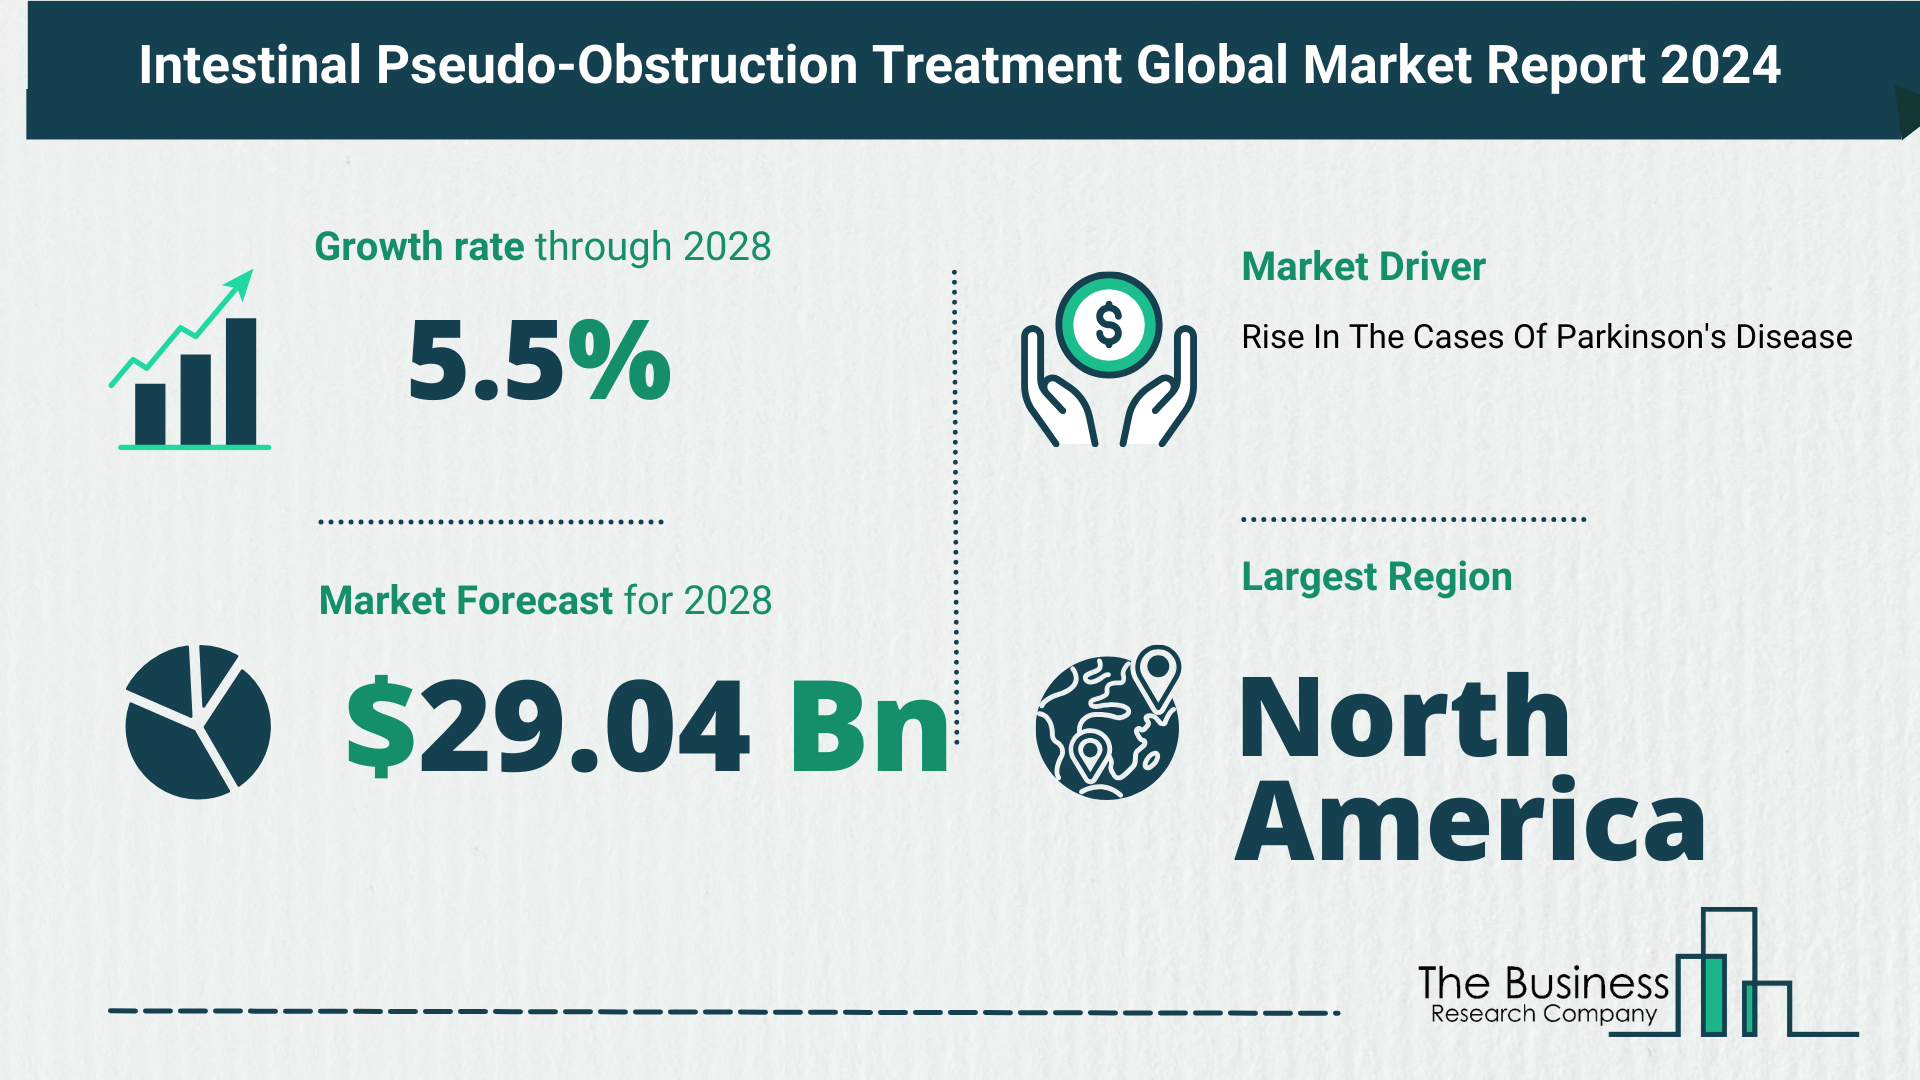 Key Trends And Drivers In The Intestinal Pseudo-Obstruction Treatment Market 2024